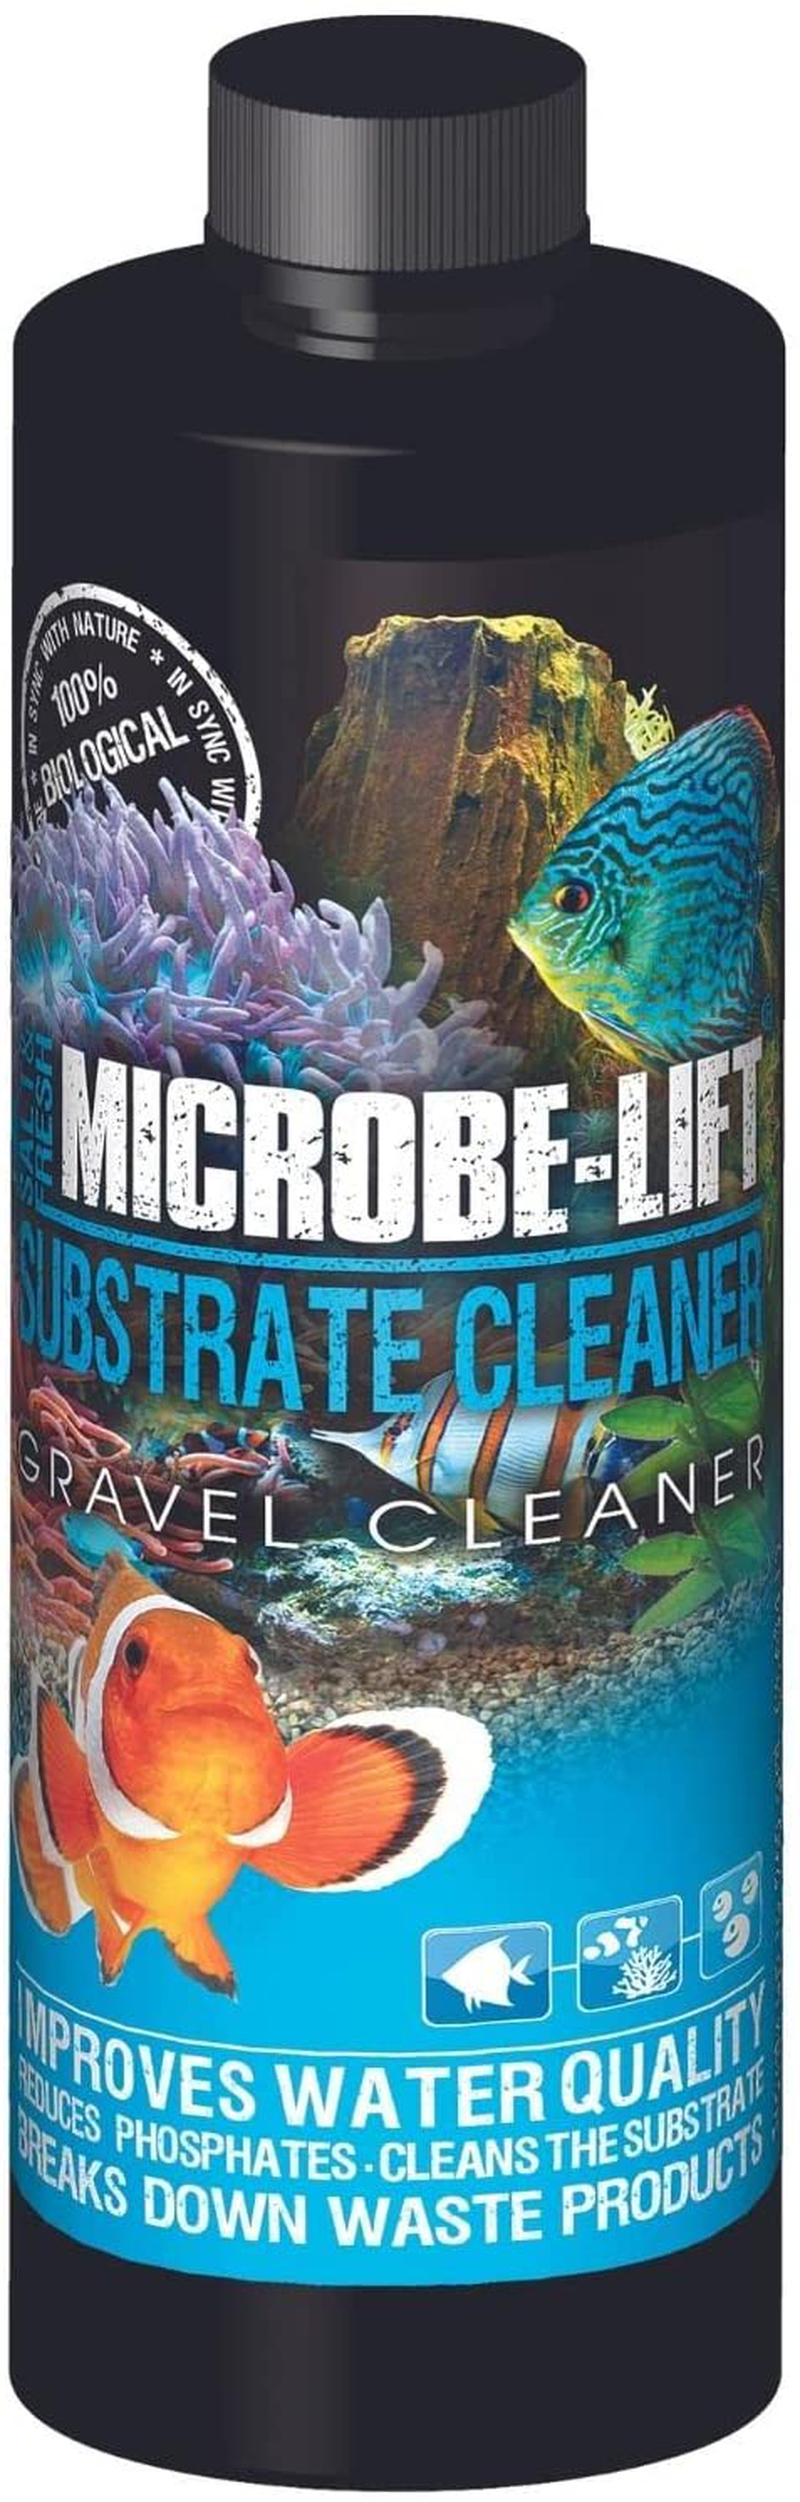 MICROBE-LIFT Professional Gravel & Substrate Cleaner for Freshwater and Saltwater Tanks, 1 Gal (1 Gallon) (16Oz)